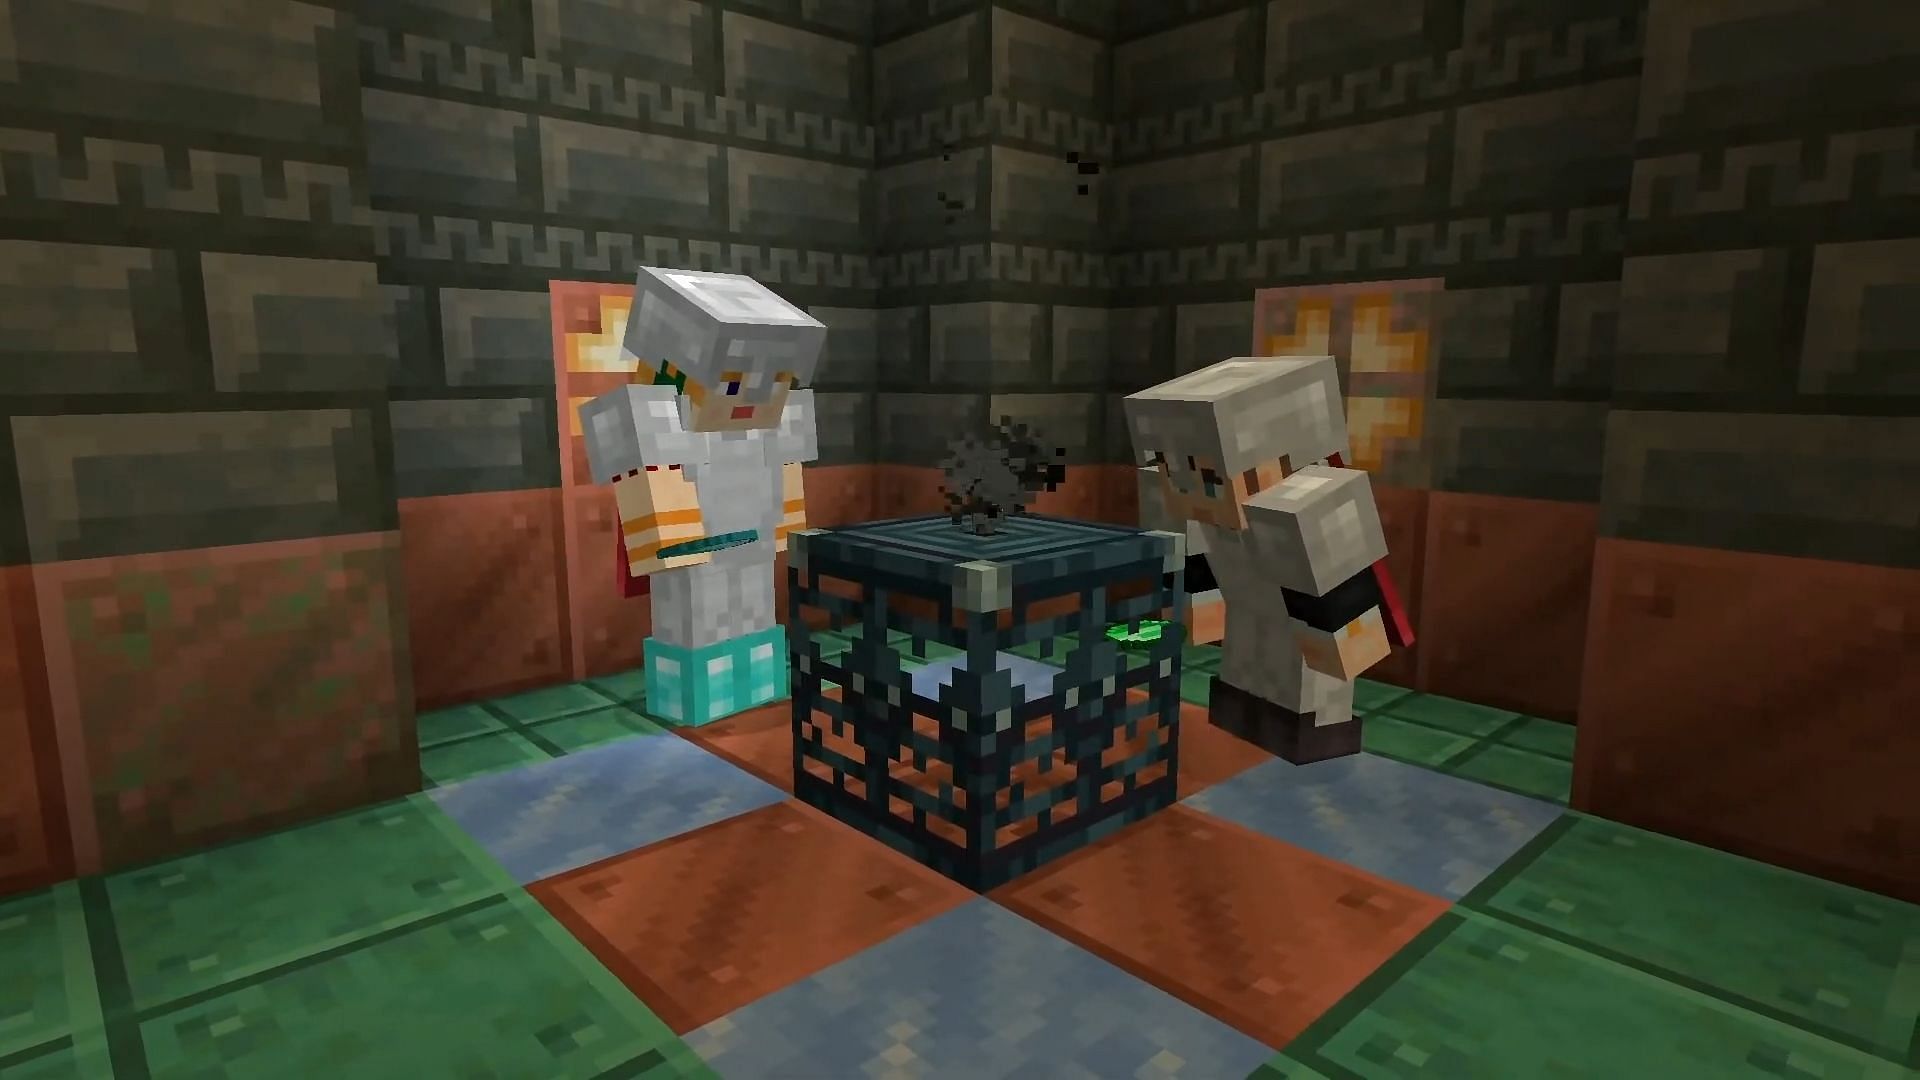 The trial spawner block may be one of the most intriguing in Minecraft 1.21 (Image via Mojang)